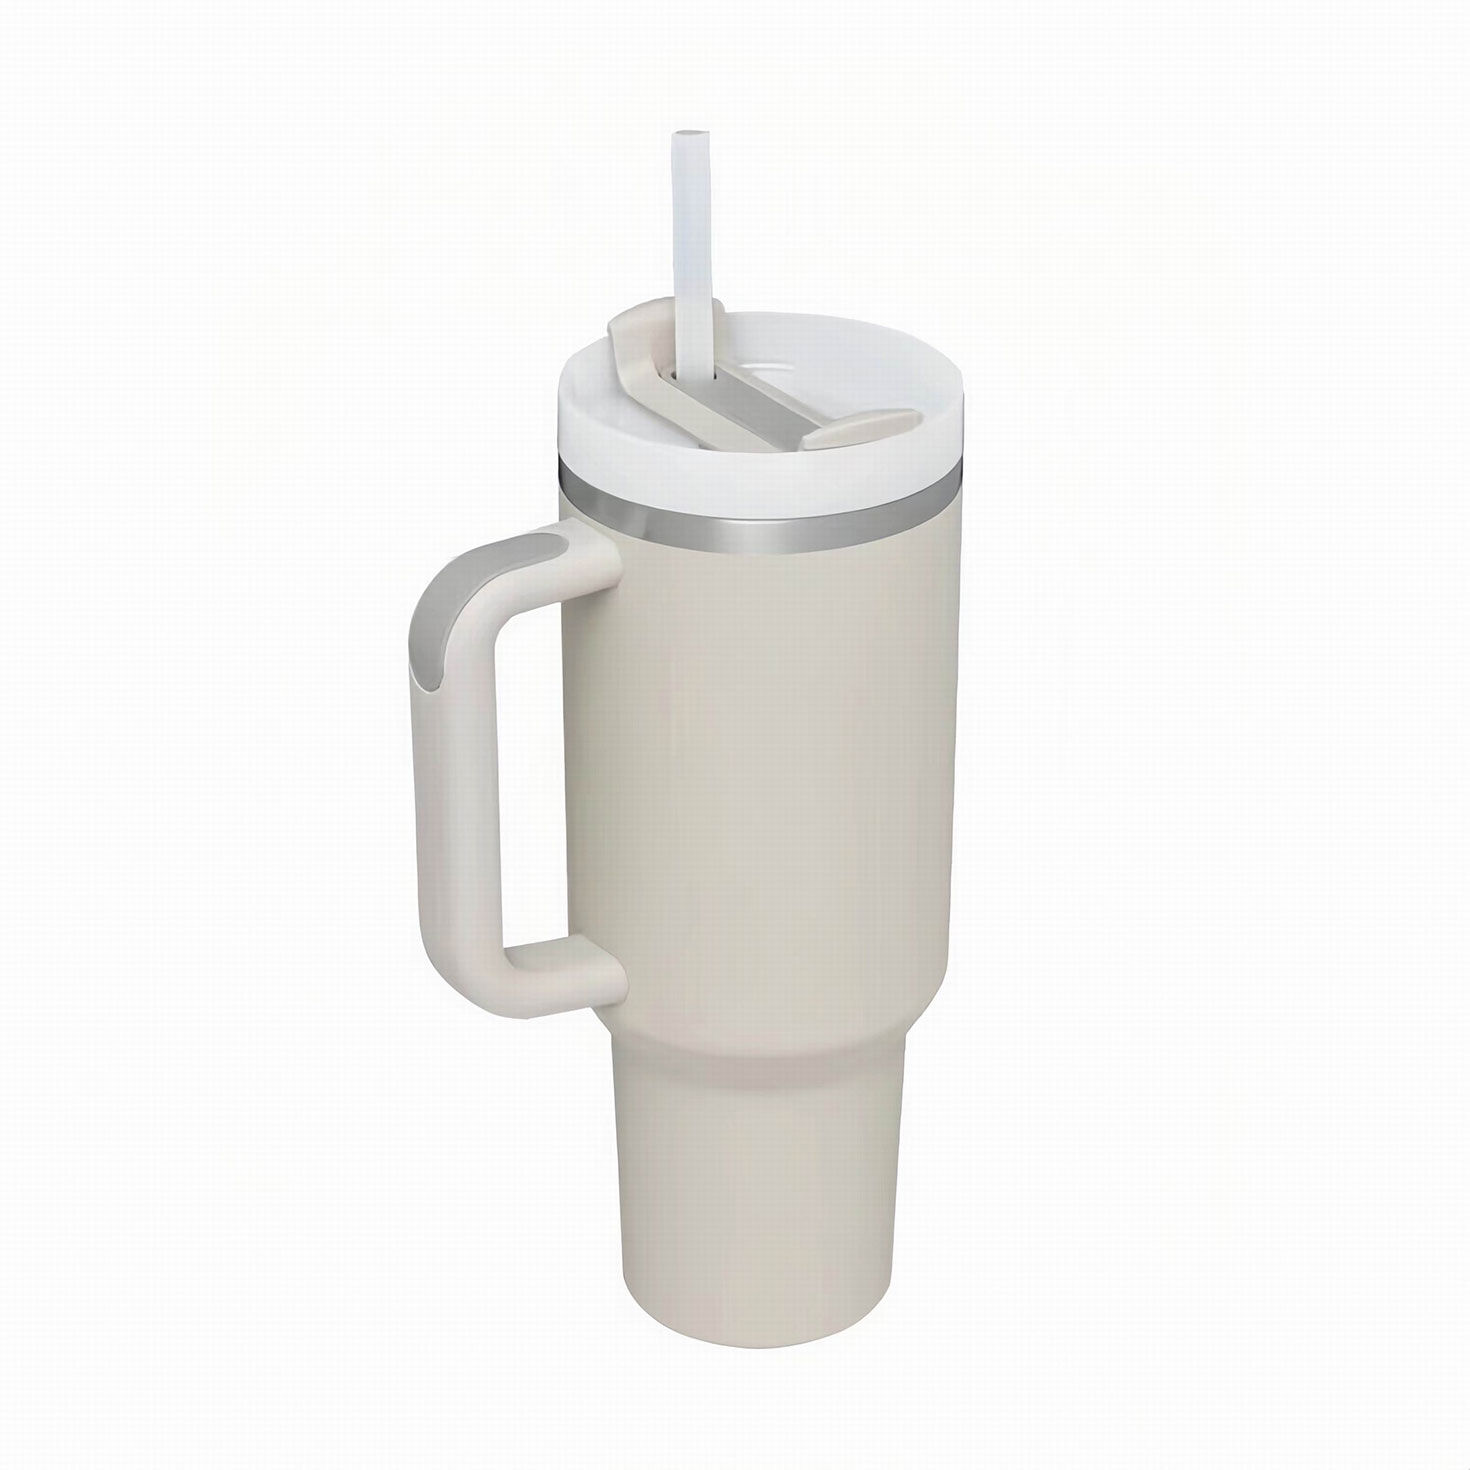 https://www.hallmark.com/dw/image/v2/AALB_PRD/on/demandware.static/-/Sites-hallmark-master/default/dwed88bf45/images/finished-goods/products/P210/Taupe-Stainless-Steel-Travel-Mug-With-Handle-and-Straw_P210_01.jpg?sfrm=jpg